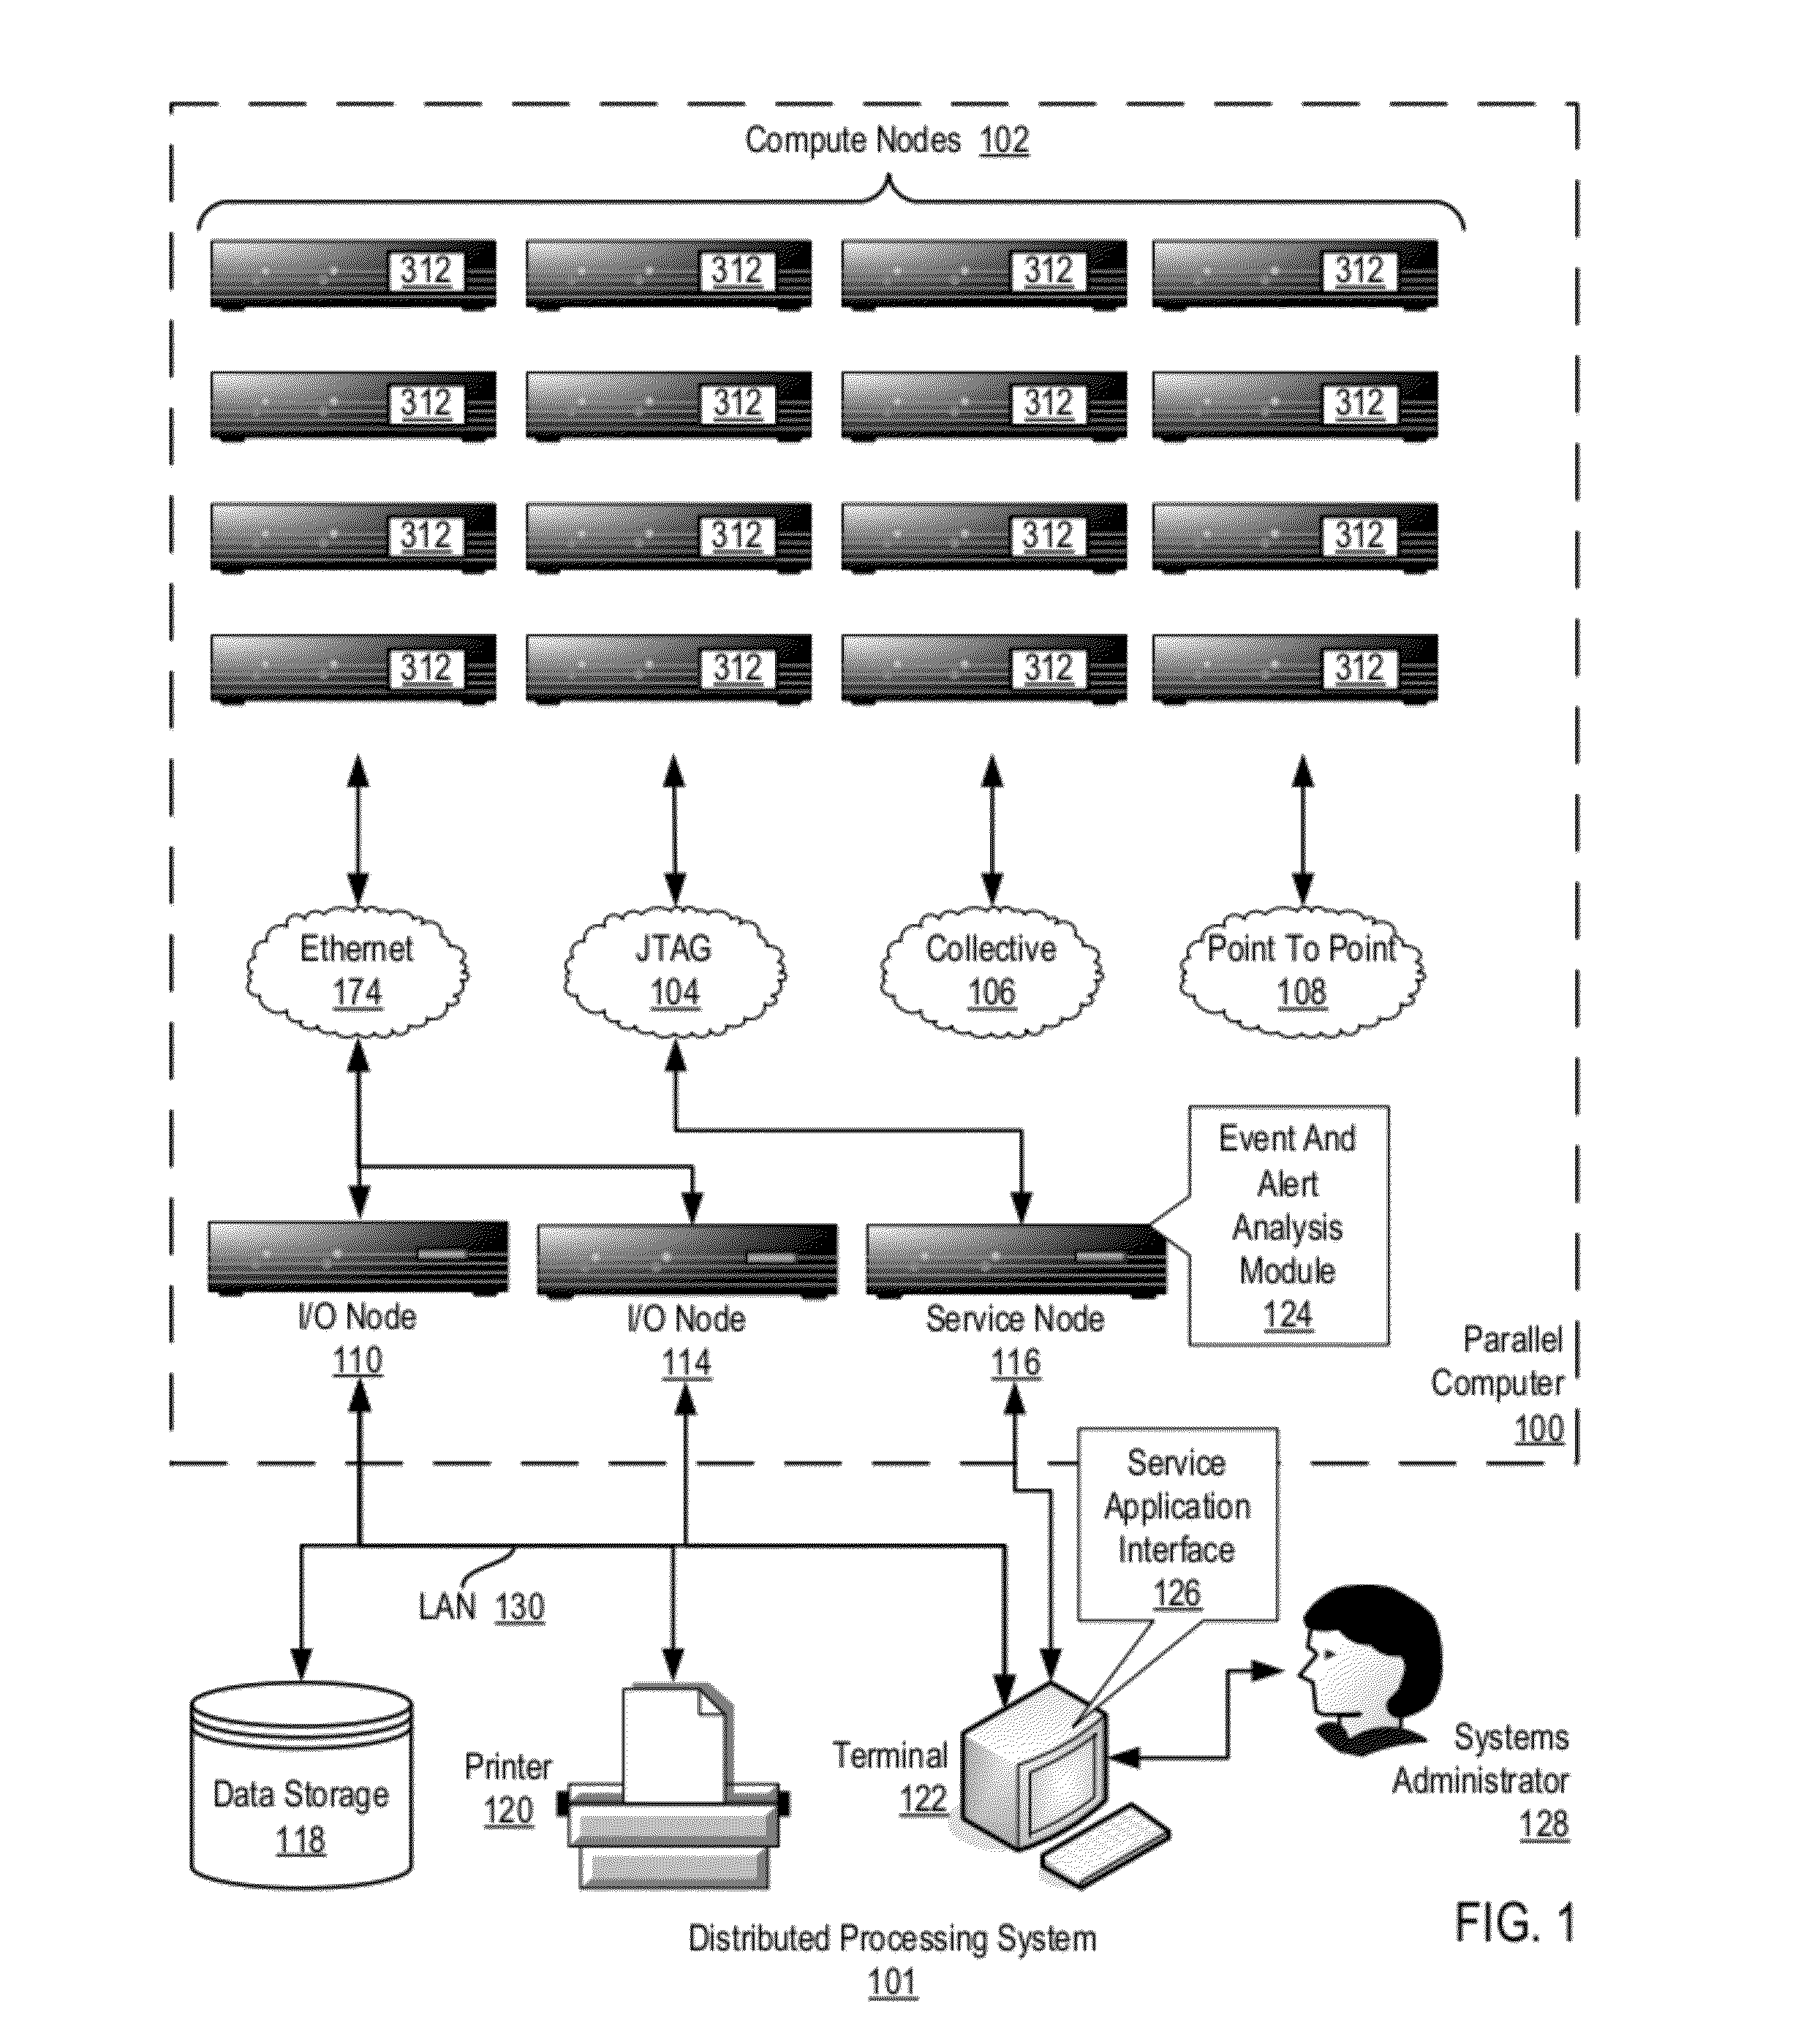 Restarting Event And Alert Analysis After A Shutdown In A Distributed Processing System